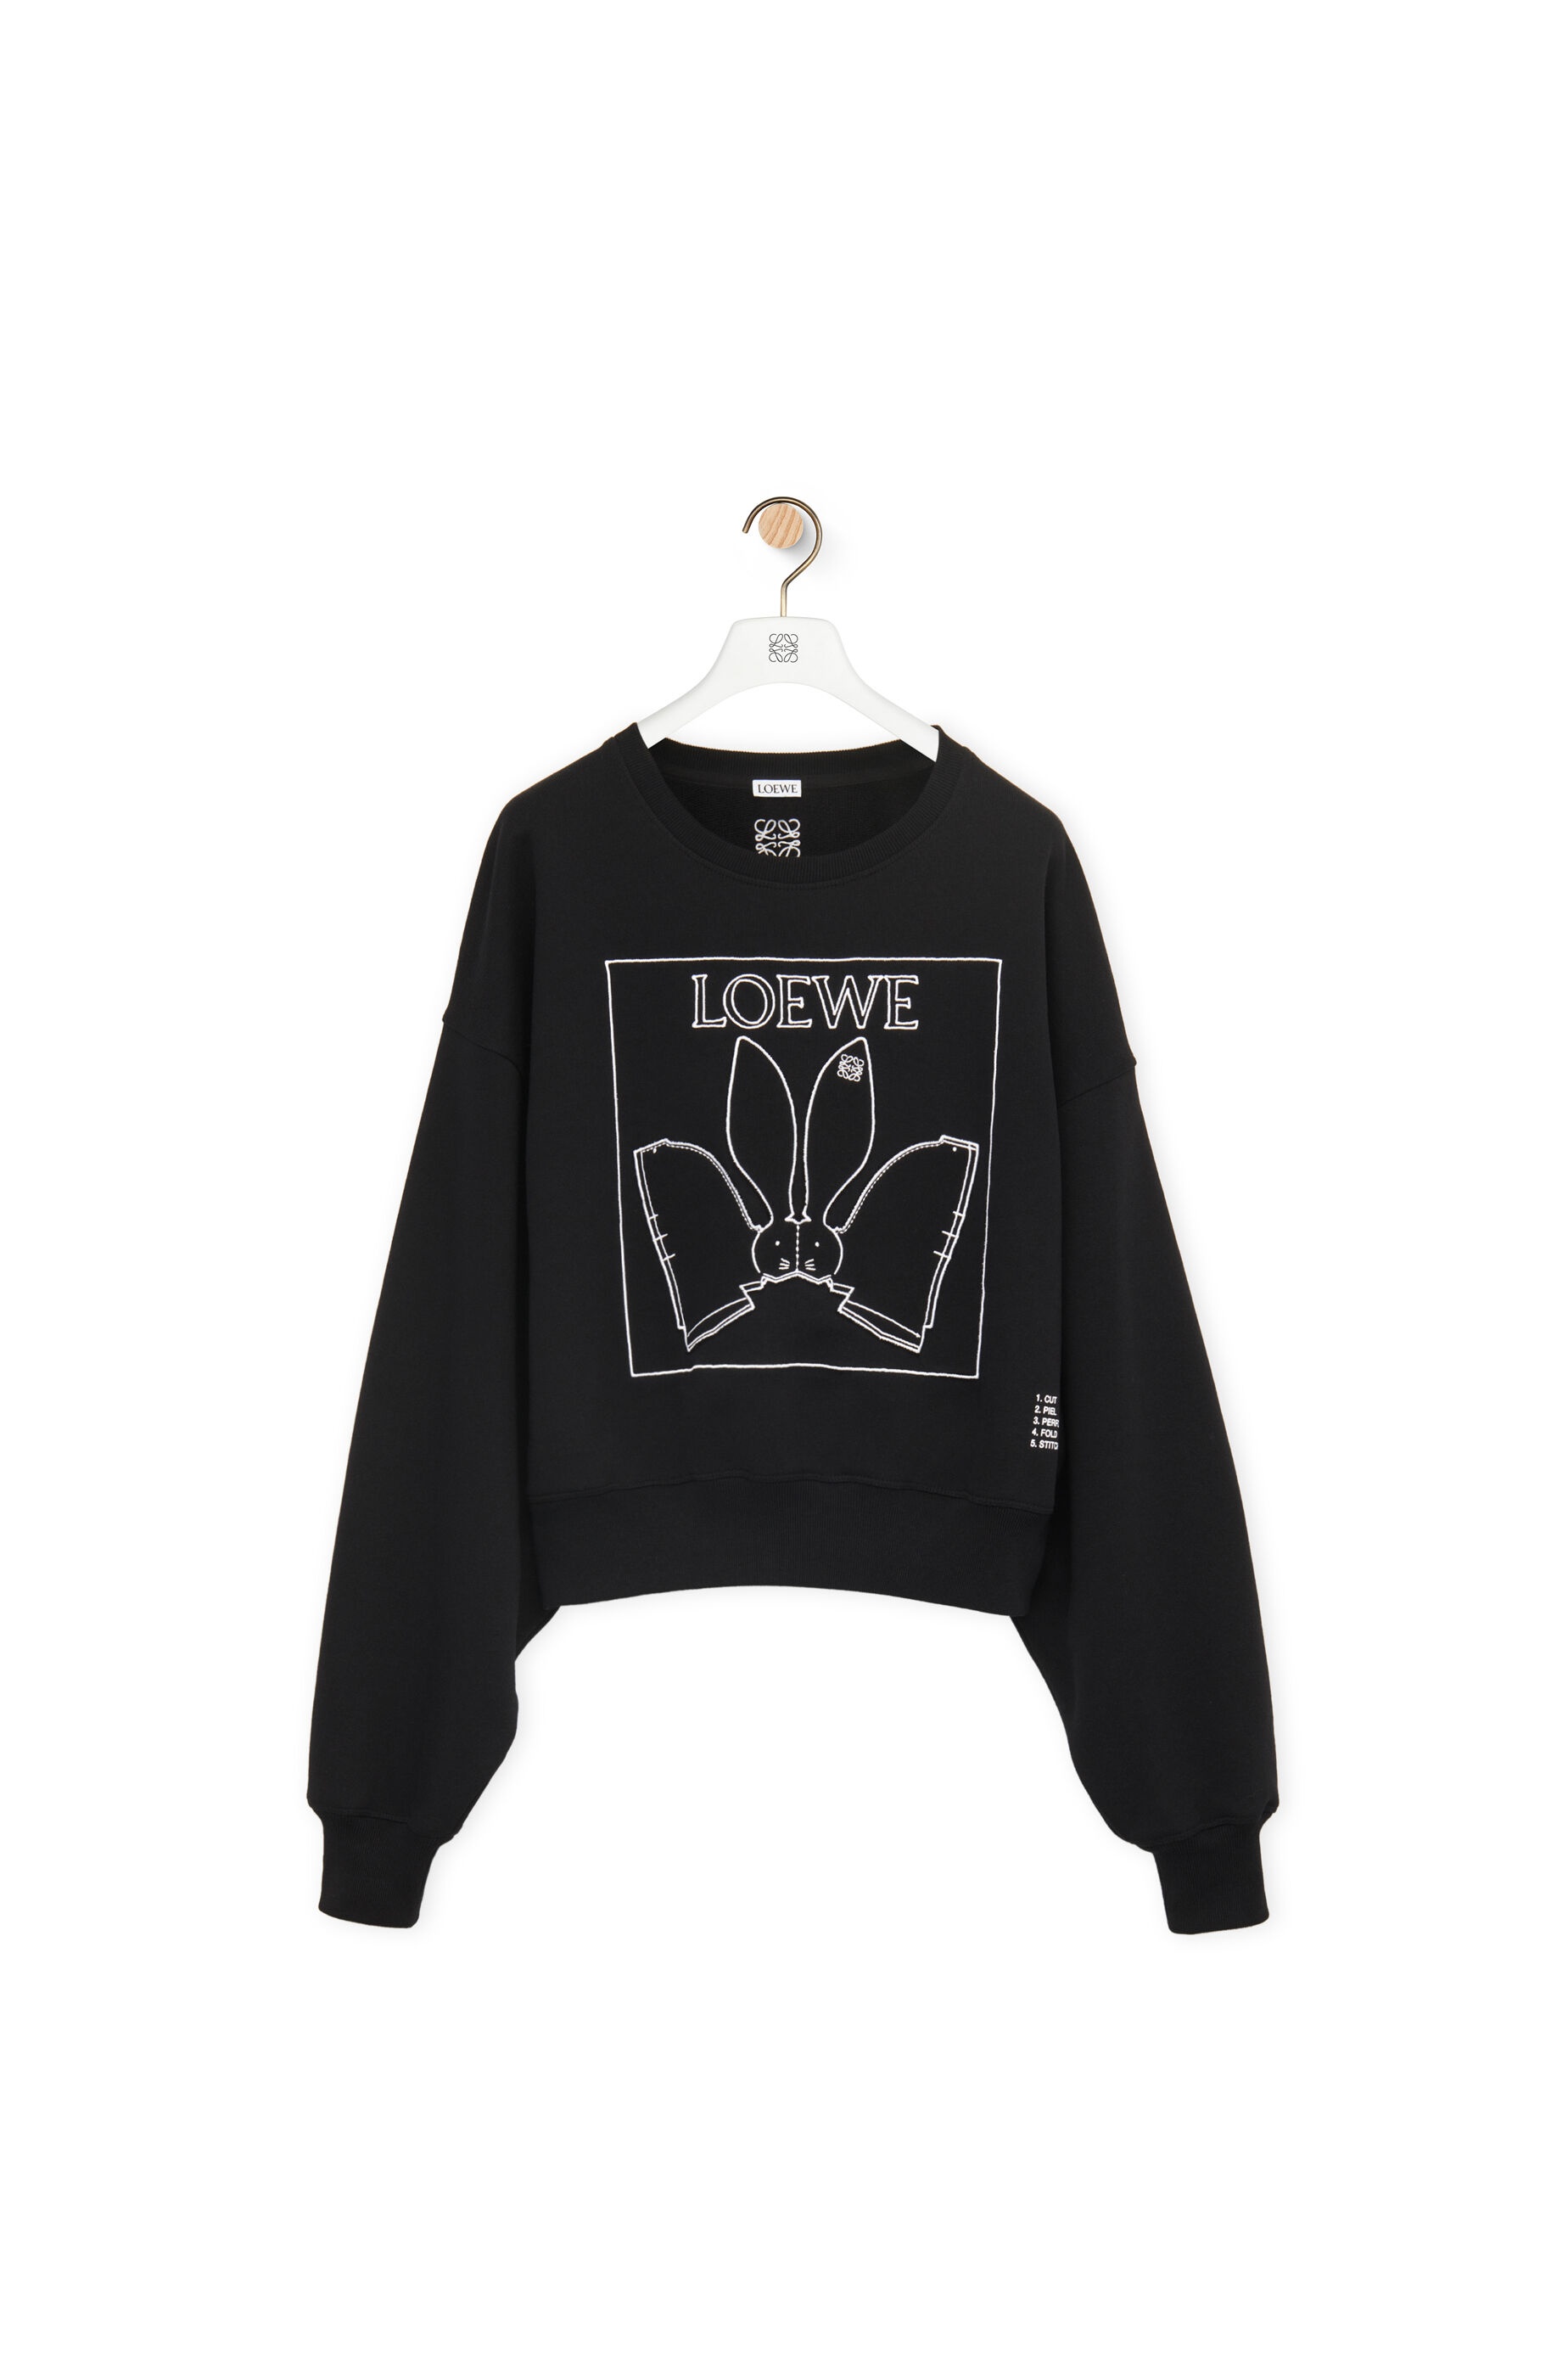 Loewe Cut Out Cropped Sweater in Black